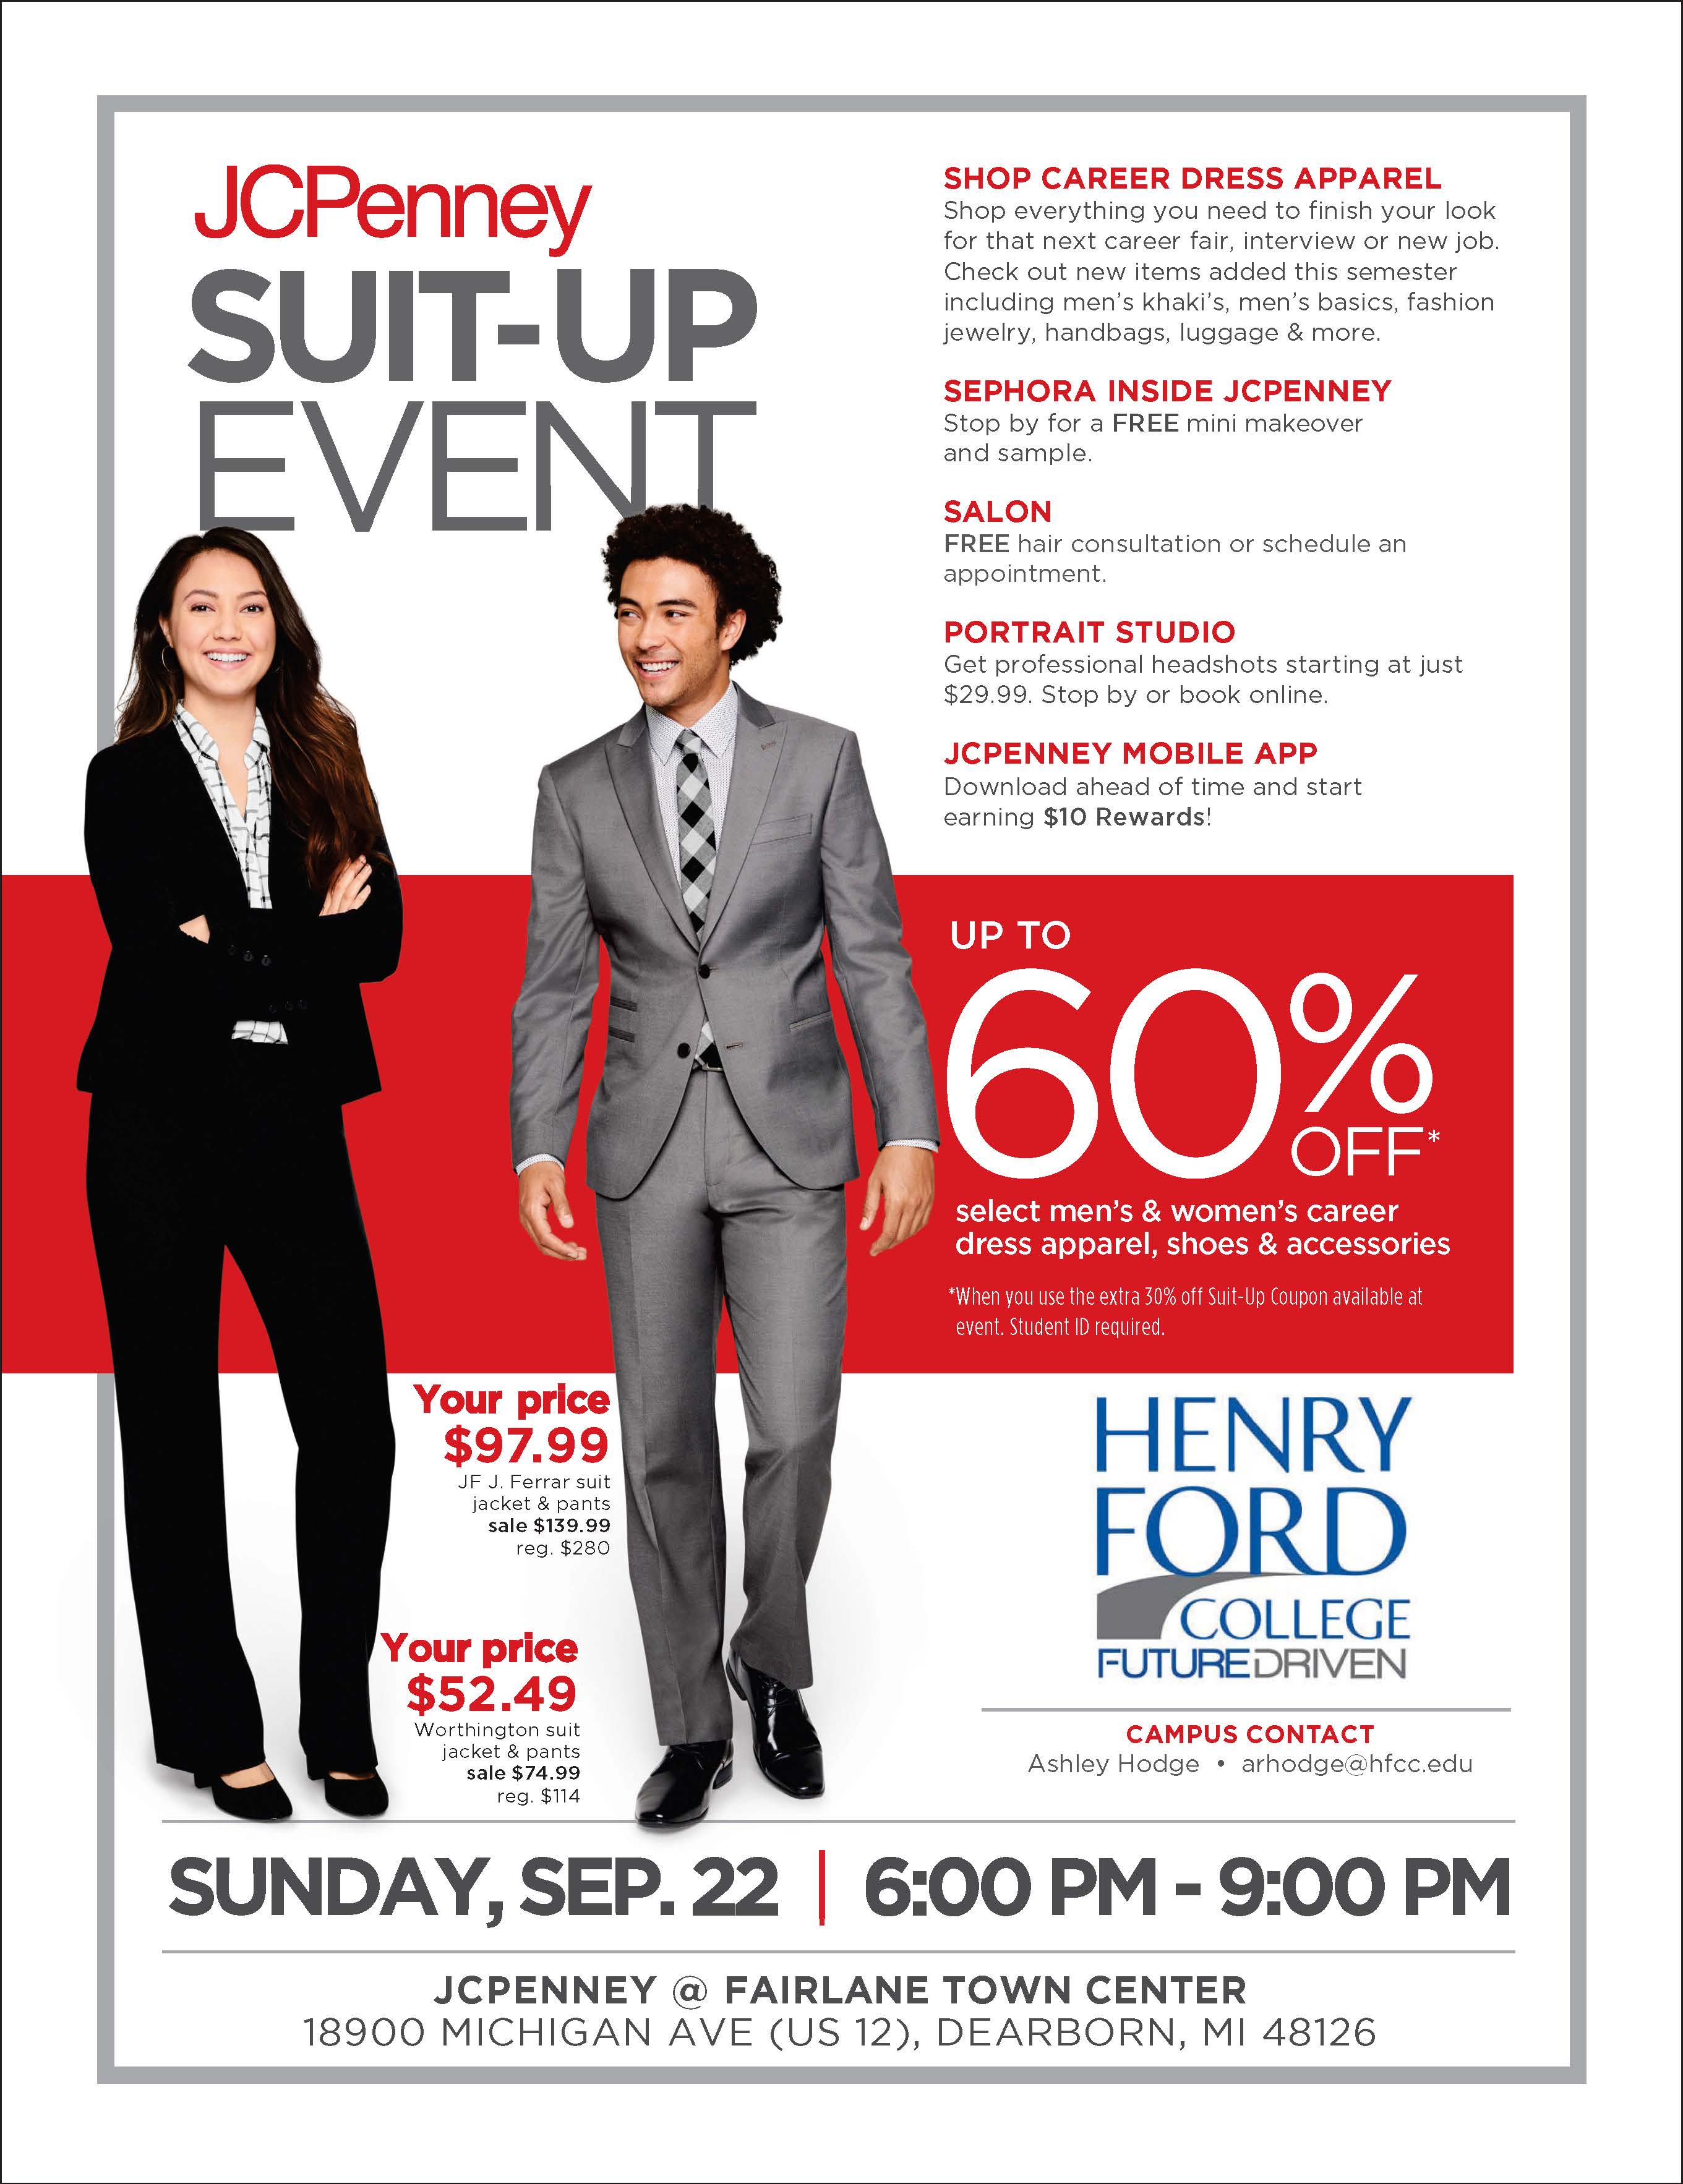 Ad for Suit-Up event featuring a well-dressed man and woman